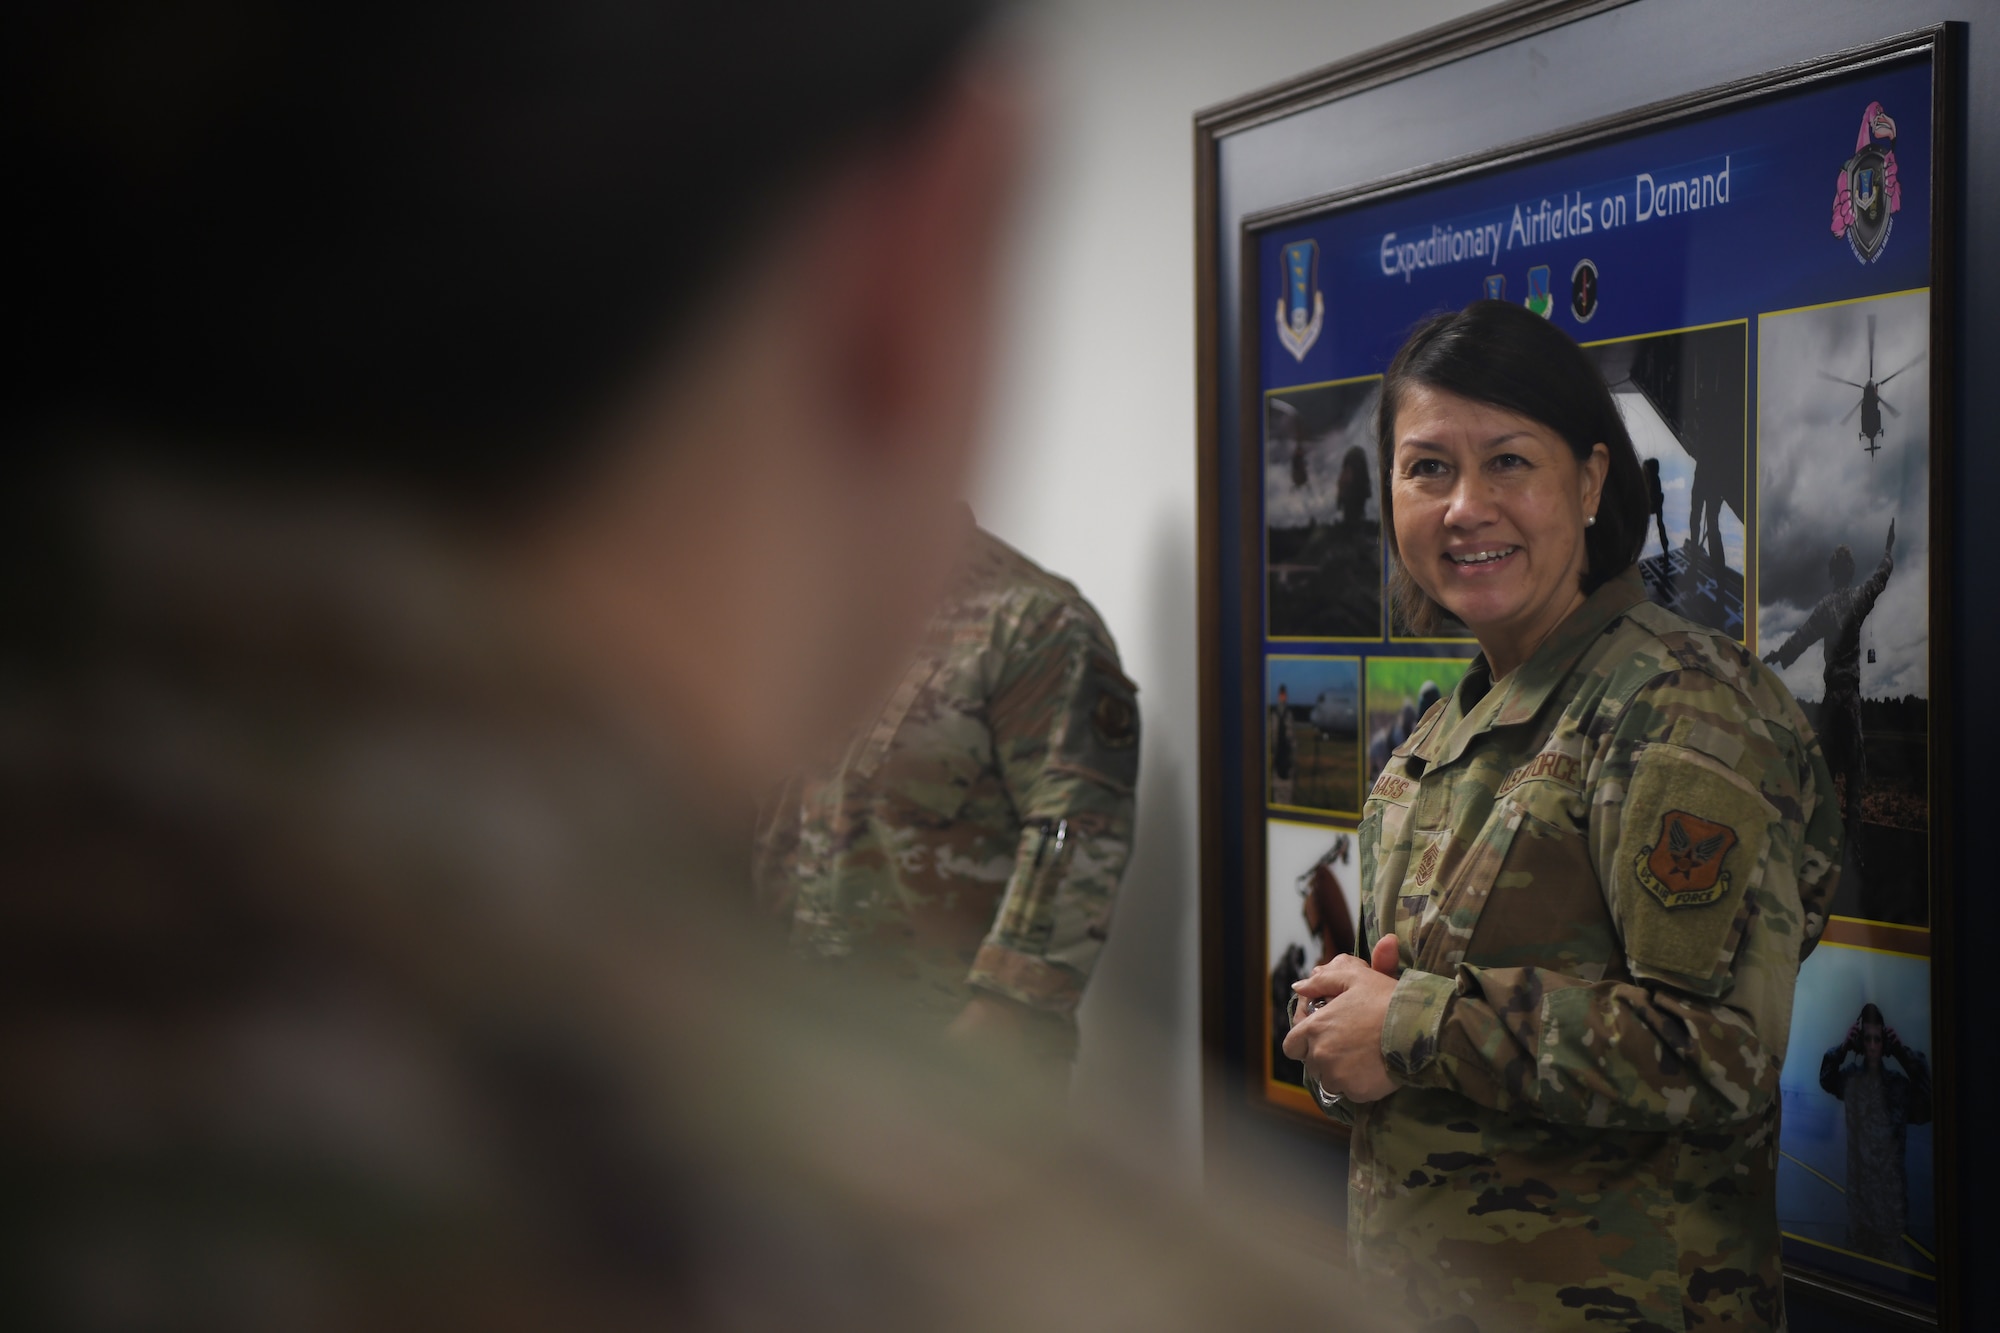 Chief Master Sgt. of the Air Force JoAnne S. Bass meets the 435th Air Expeditionary Wing (AEW) fly-away security team (FAST) at Ramstein Air Base, Germany, Dec. 19, 2021. The 435th AEW FAST provides aircraft security in support of contingencies, theater security operation events, humanitarian and civic assistance projects, expeditionary deployments. (U.S. Air Force photo by Senior Airman Ericka A. Woolever)